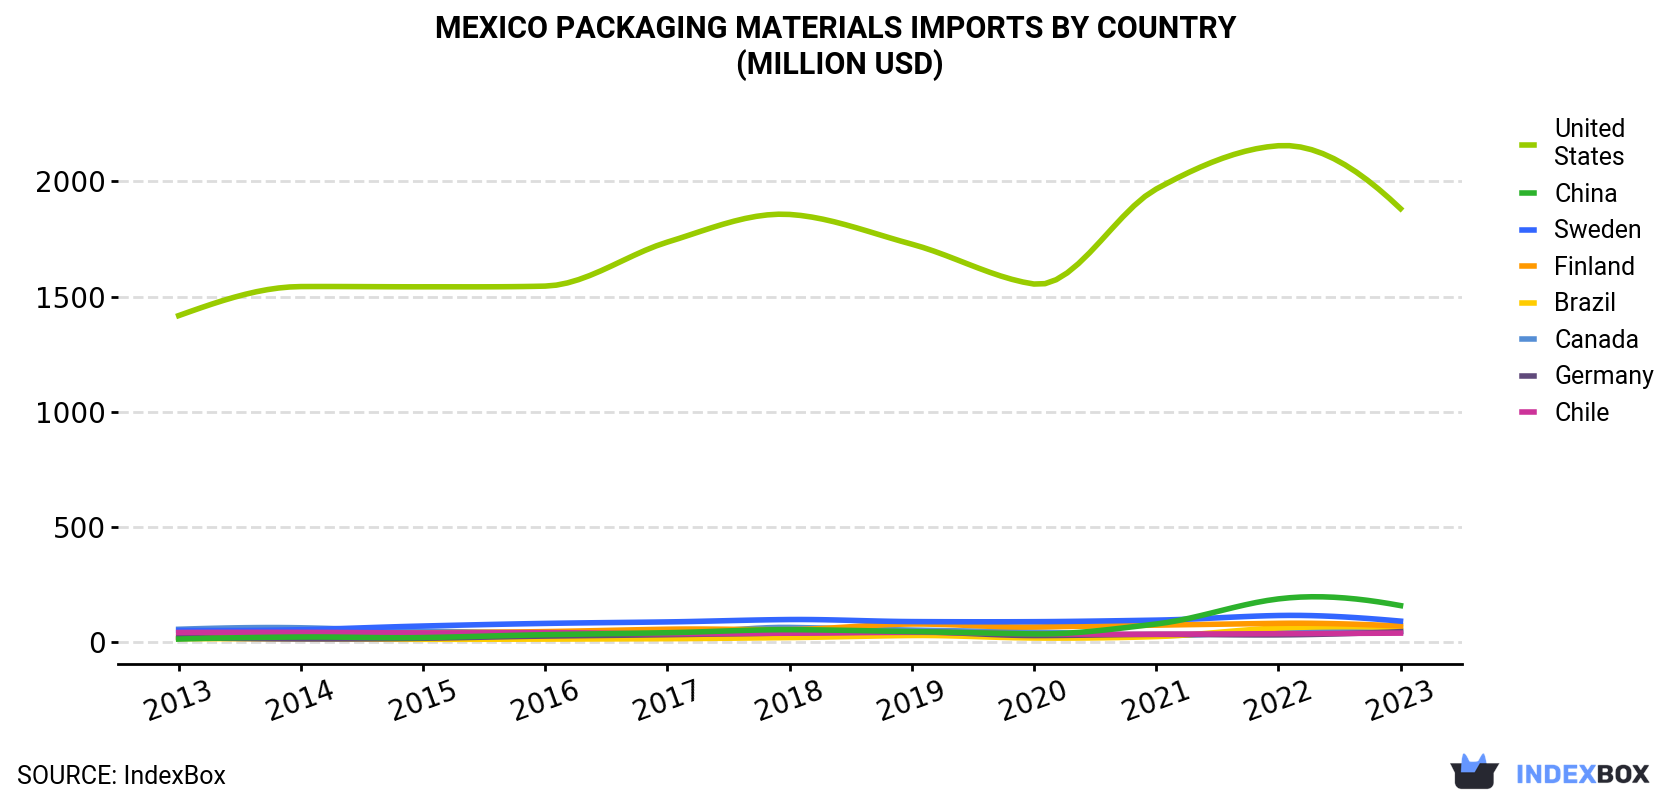 Mexico Packaging Materials Imports By Country (Million USD)